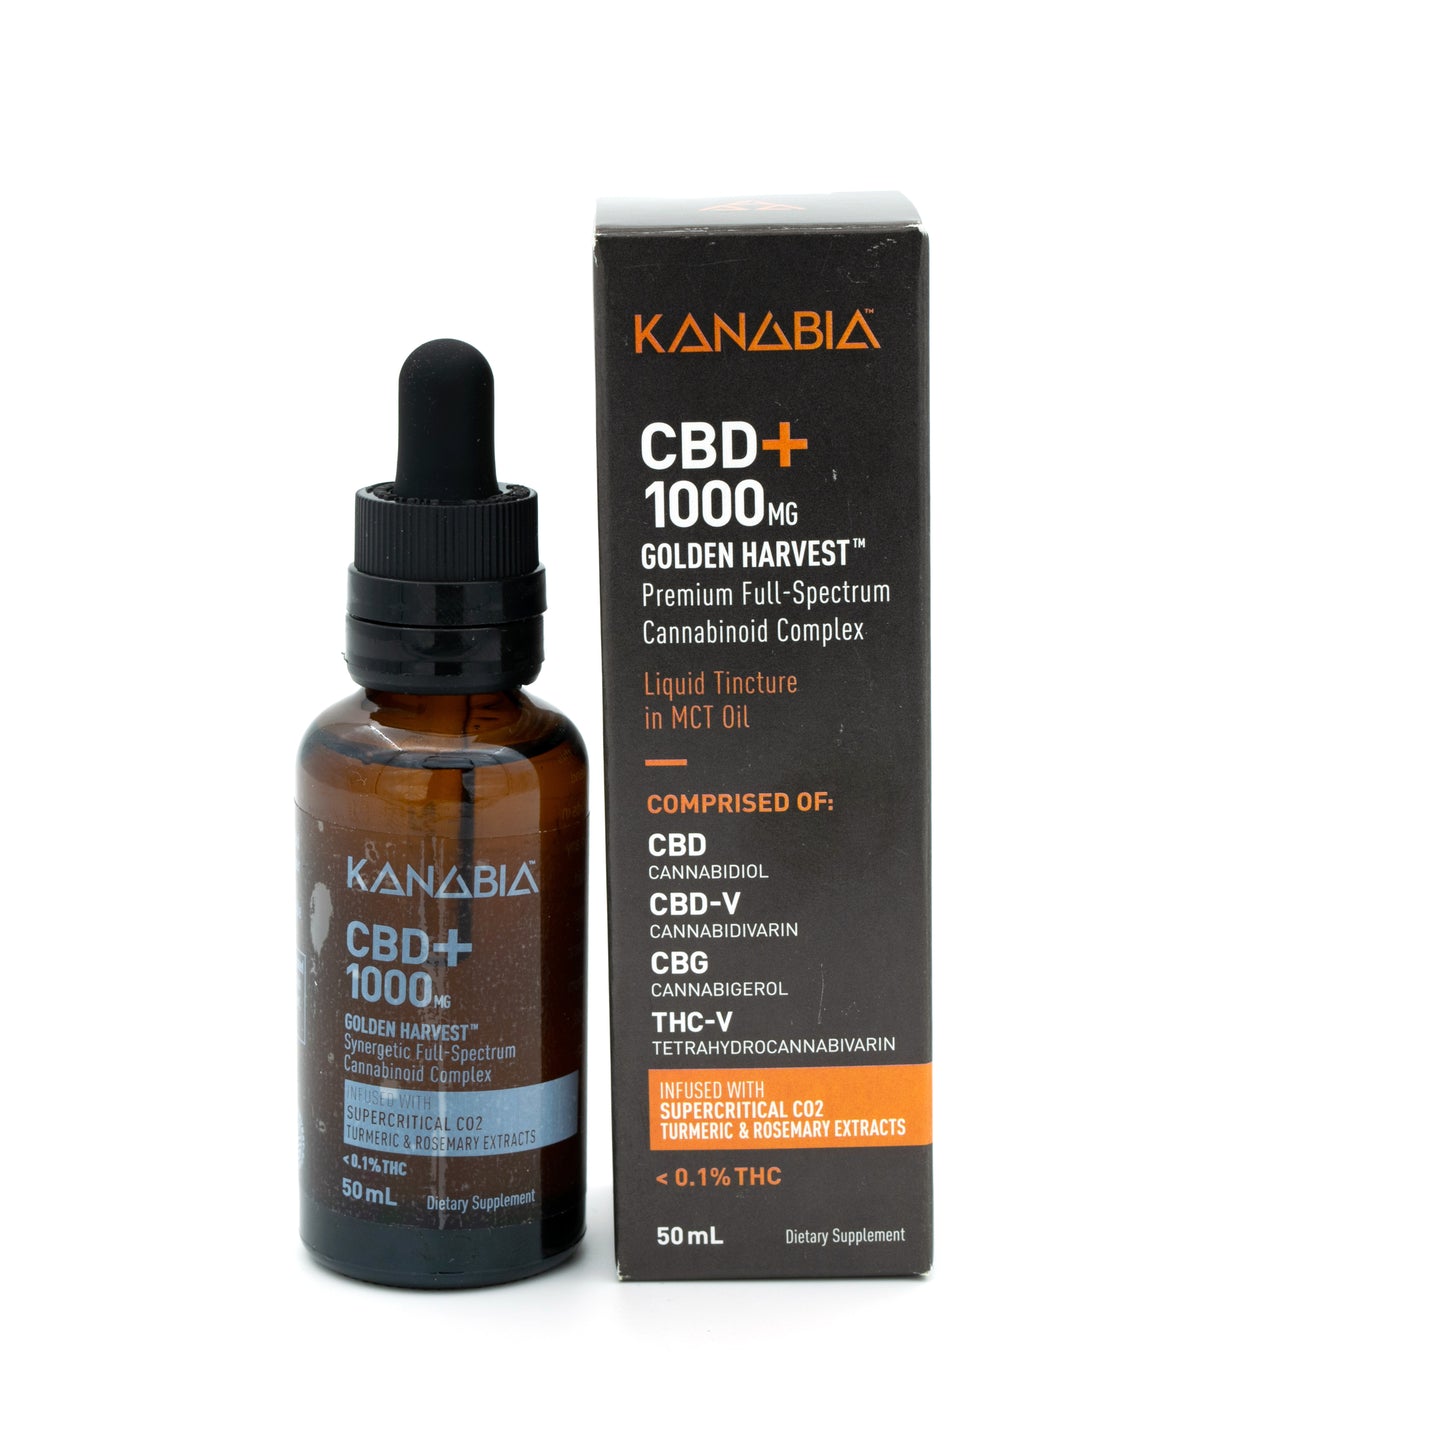 Kanabia Full-Spectrum CBD Oil with Turmeric & Rosemary Extract CO2 Infused